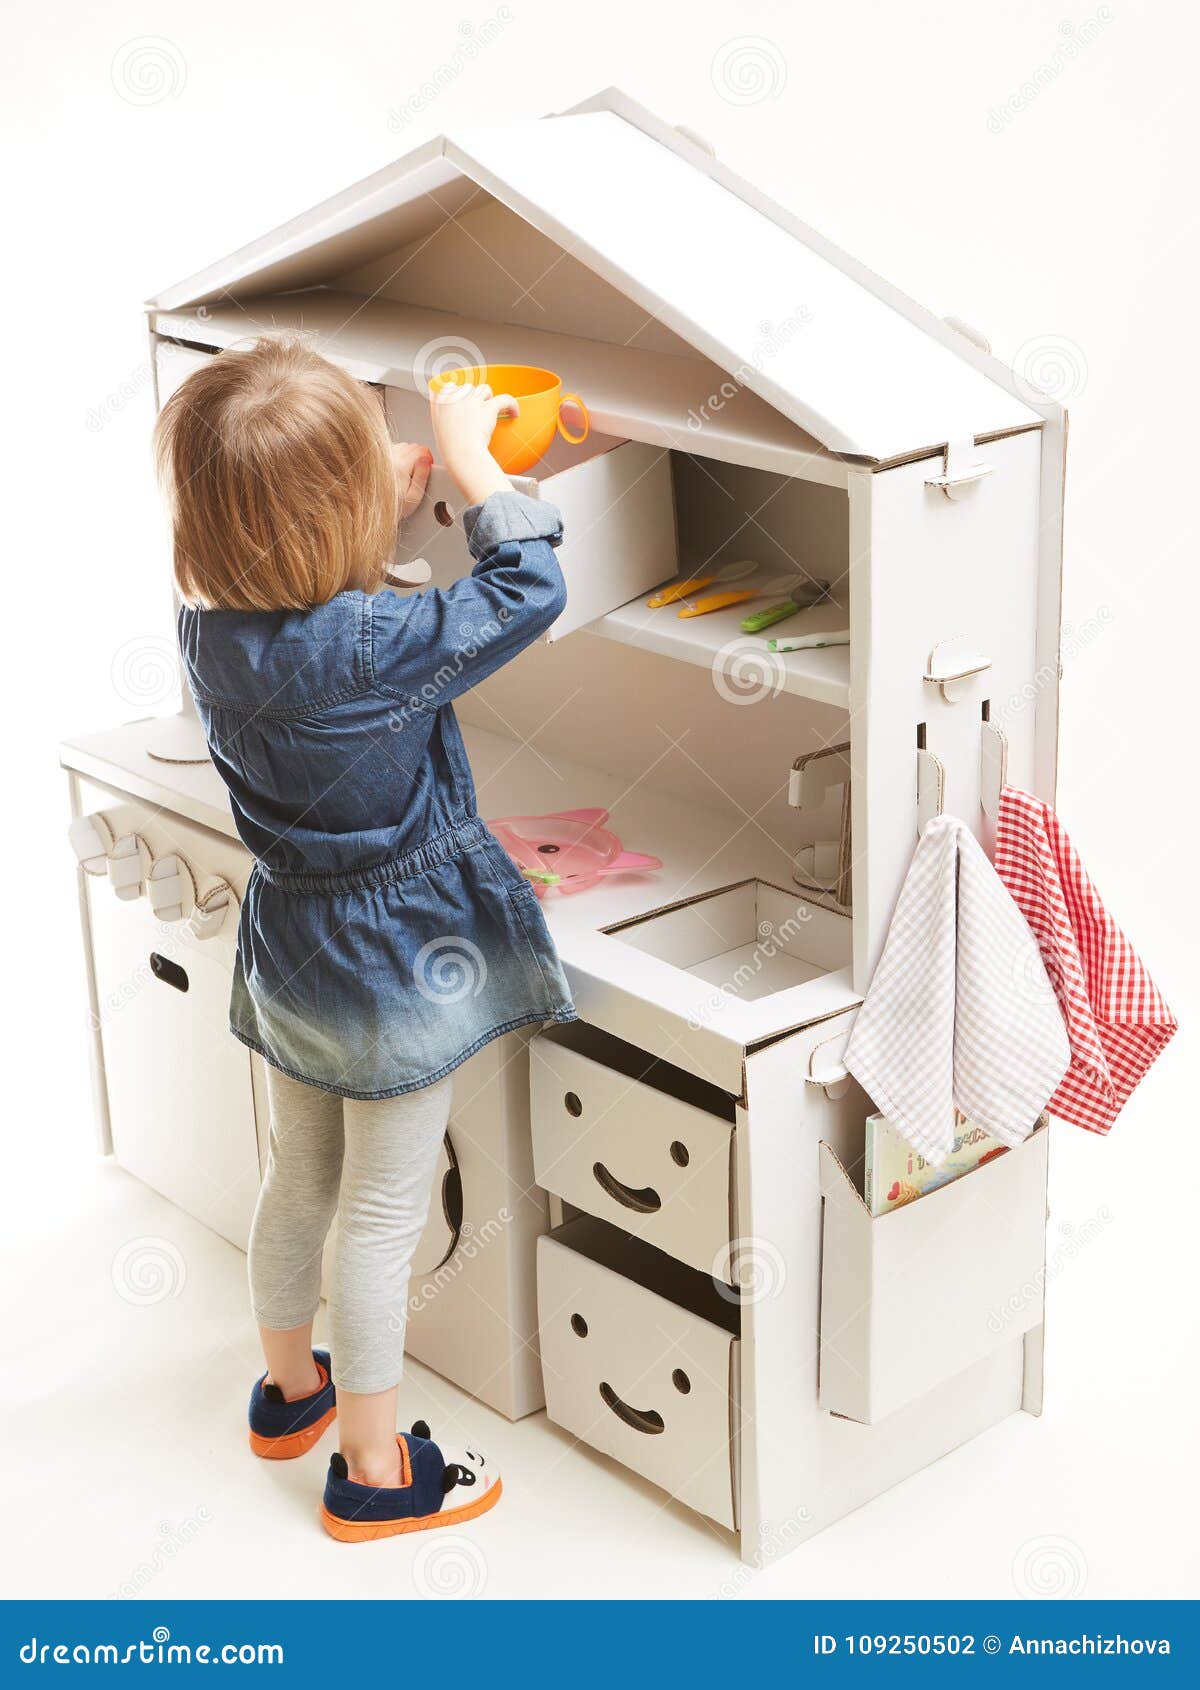 Toddler Girl Playing with Toy Kitchen at Home Stock Photo - Image of kitchen, food: 109250502